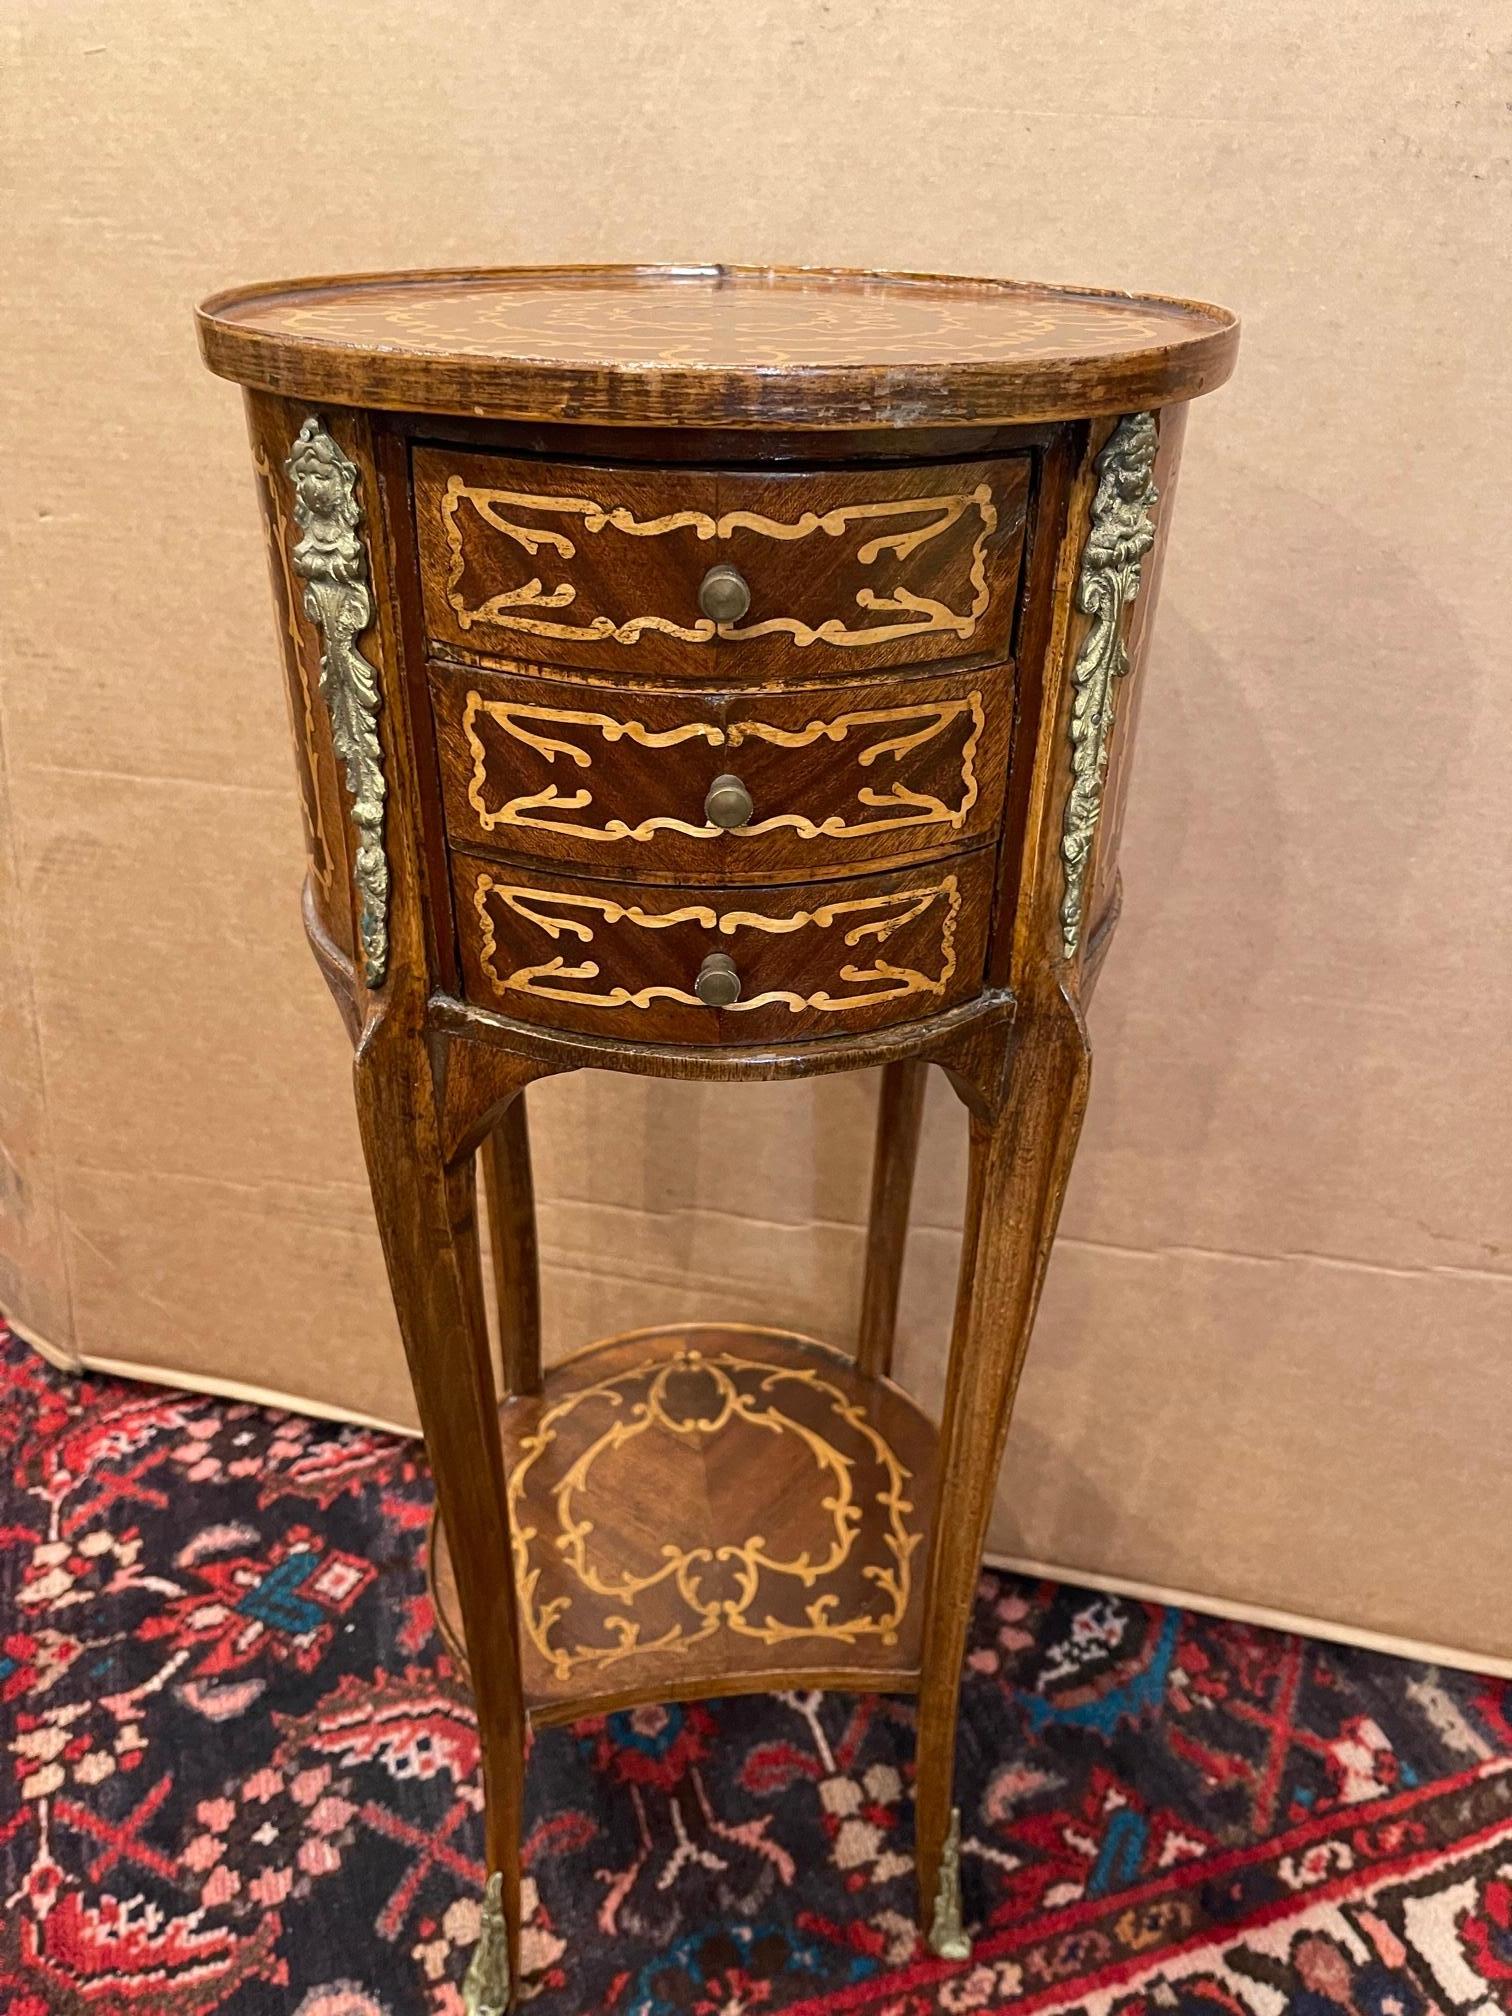 French Marquetry side table with three drawers, wood gallery, and brass Escutcheons, 20th century.
    